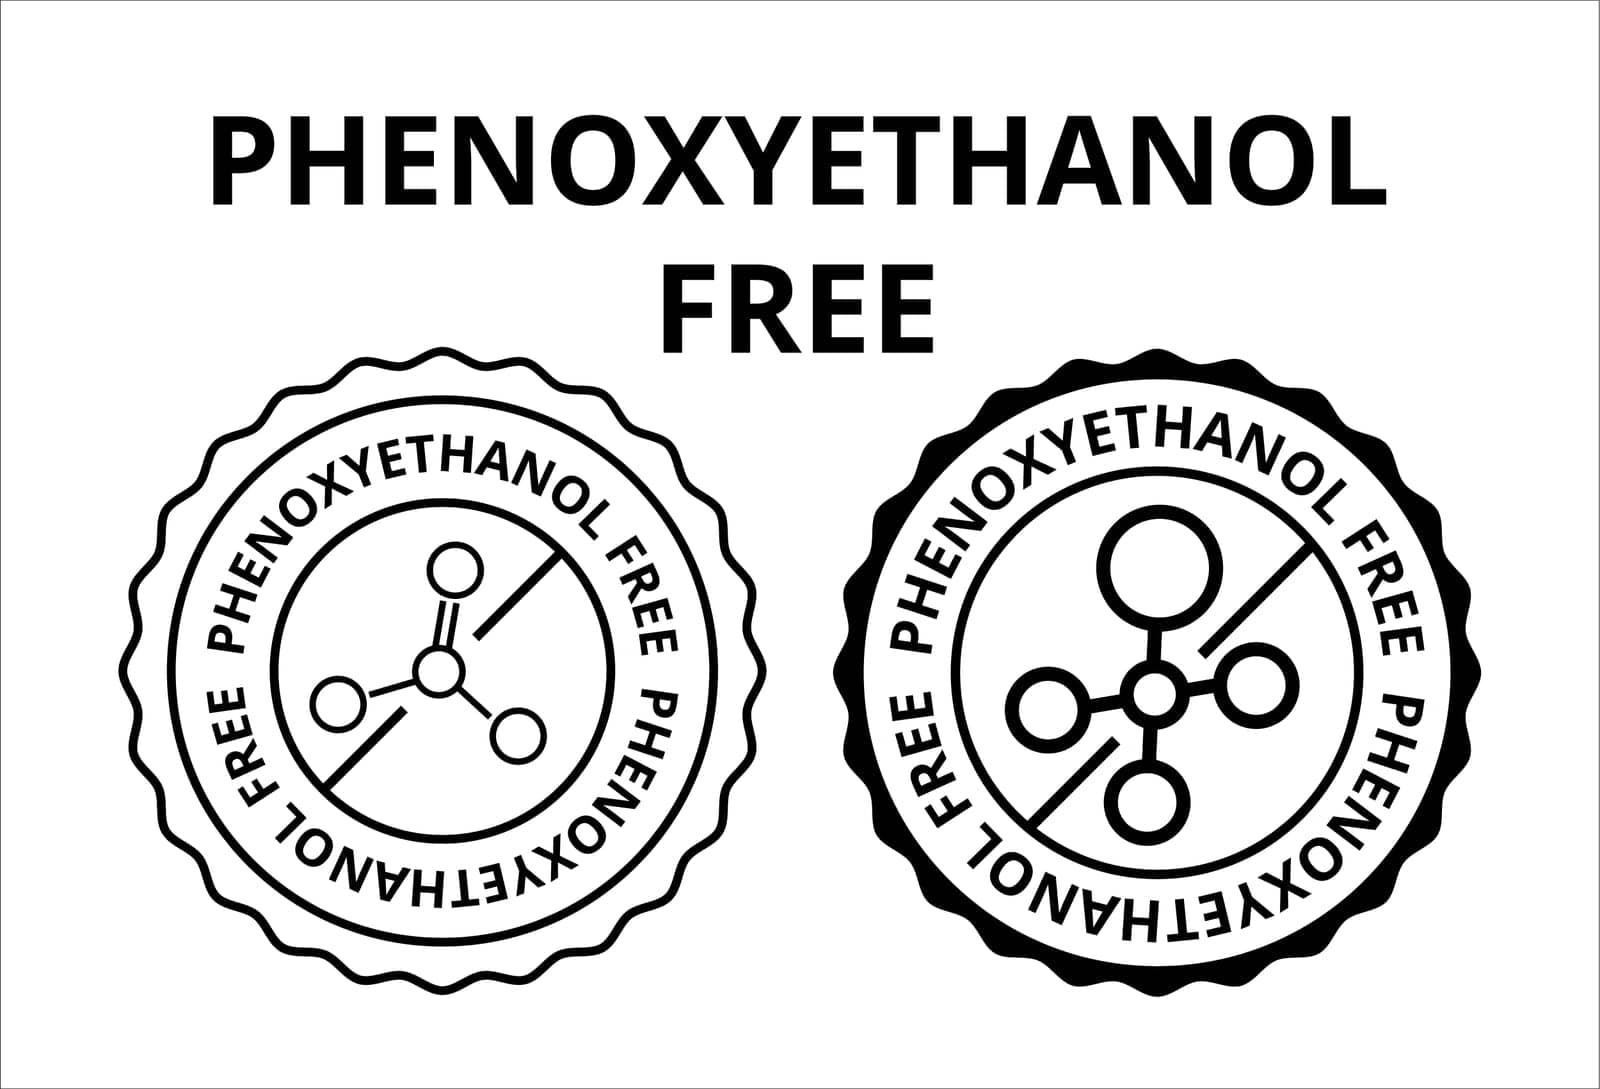 Phenoxyethanol free. Used cosmetic ingredient and preservative. Inhibits microbial growth, and extends shelf life. Vector logo icon illustration.